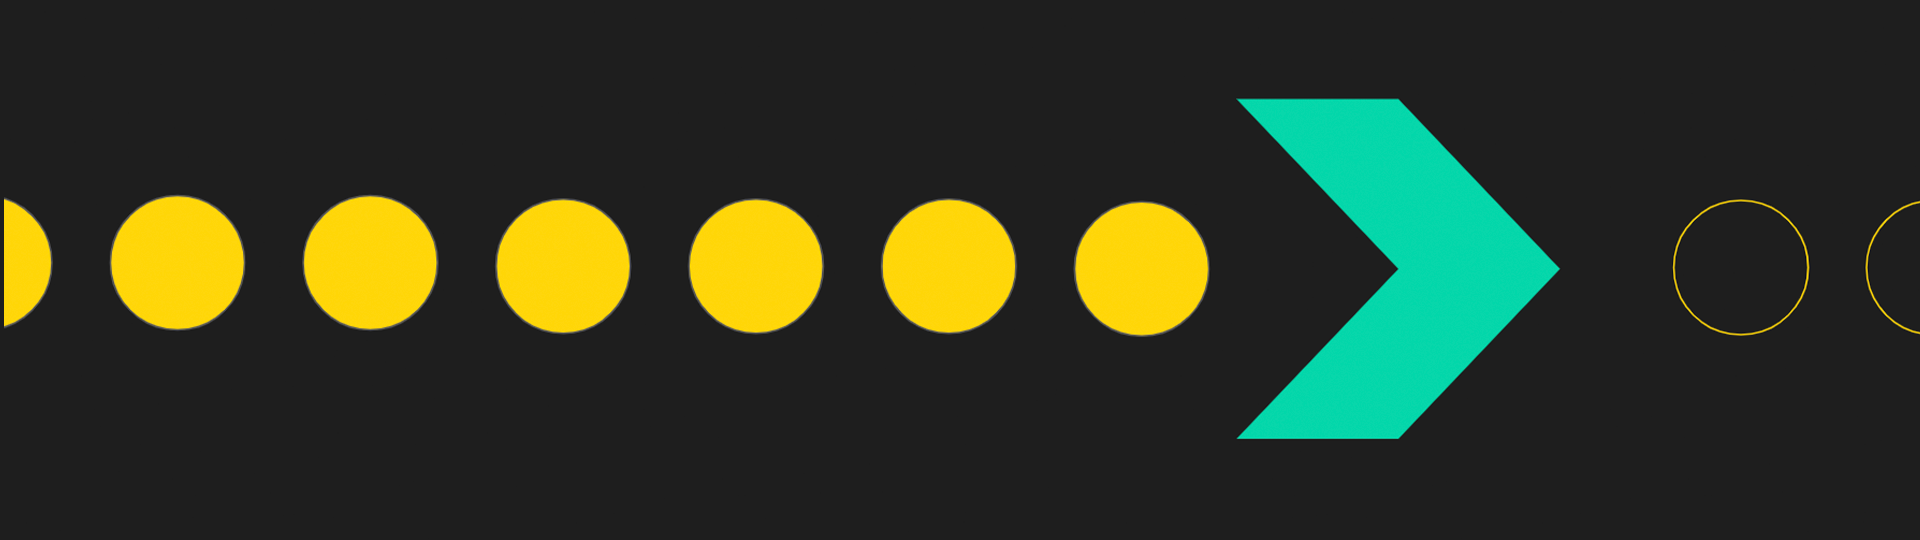 a series of yellow circles leading to a teal arrow on the right